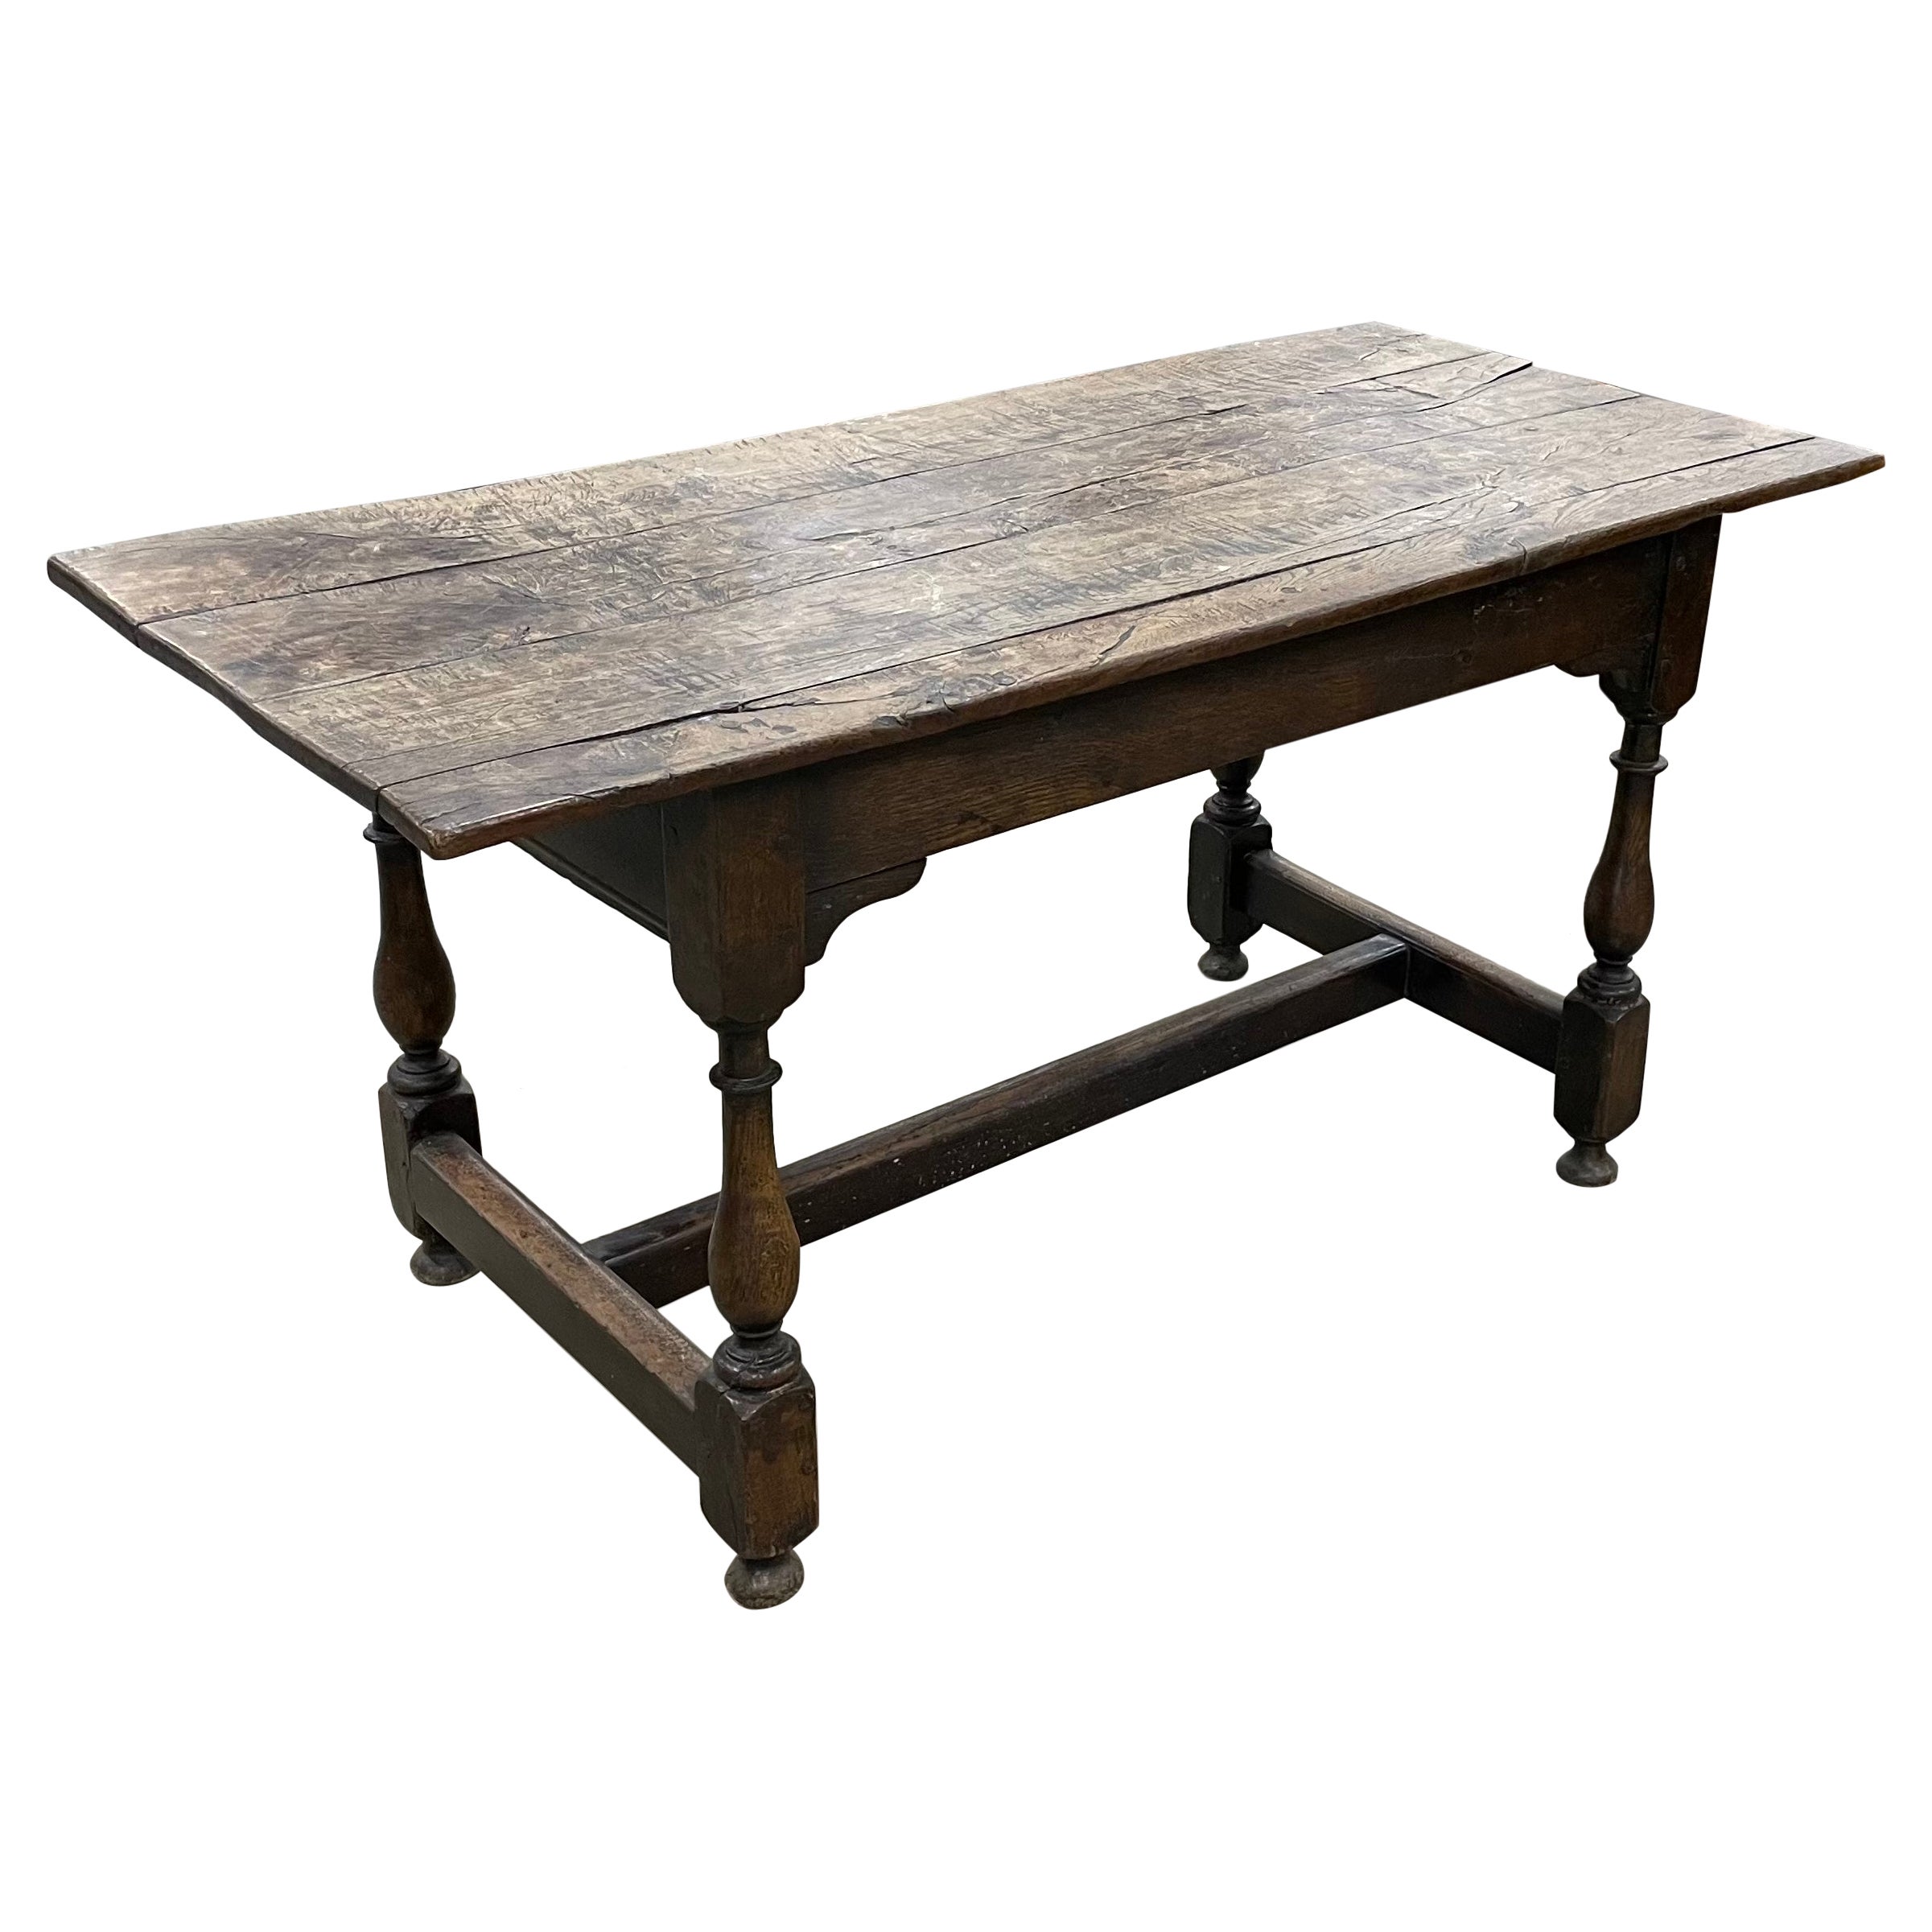 Charles II Tables